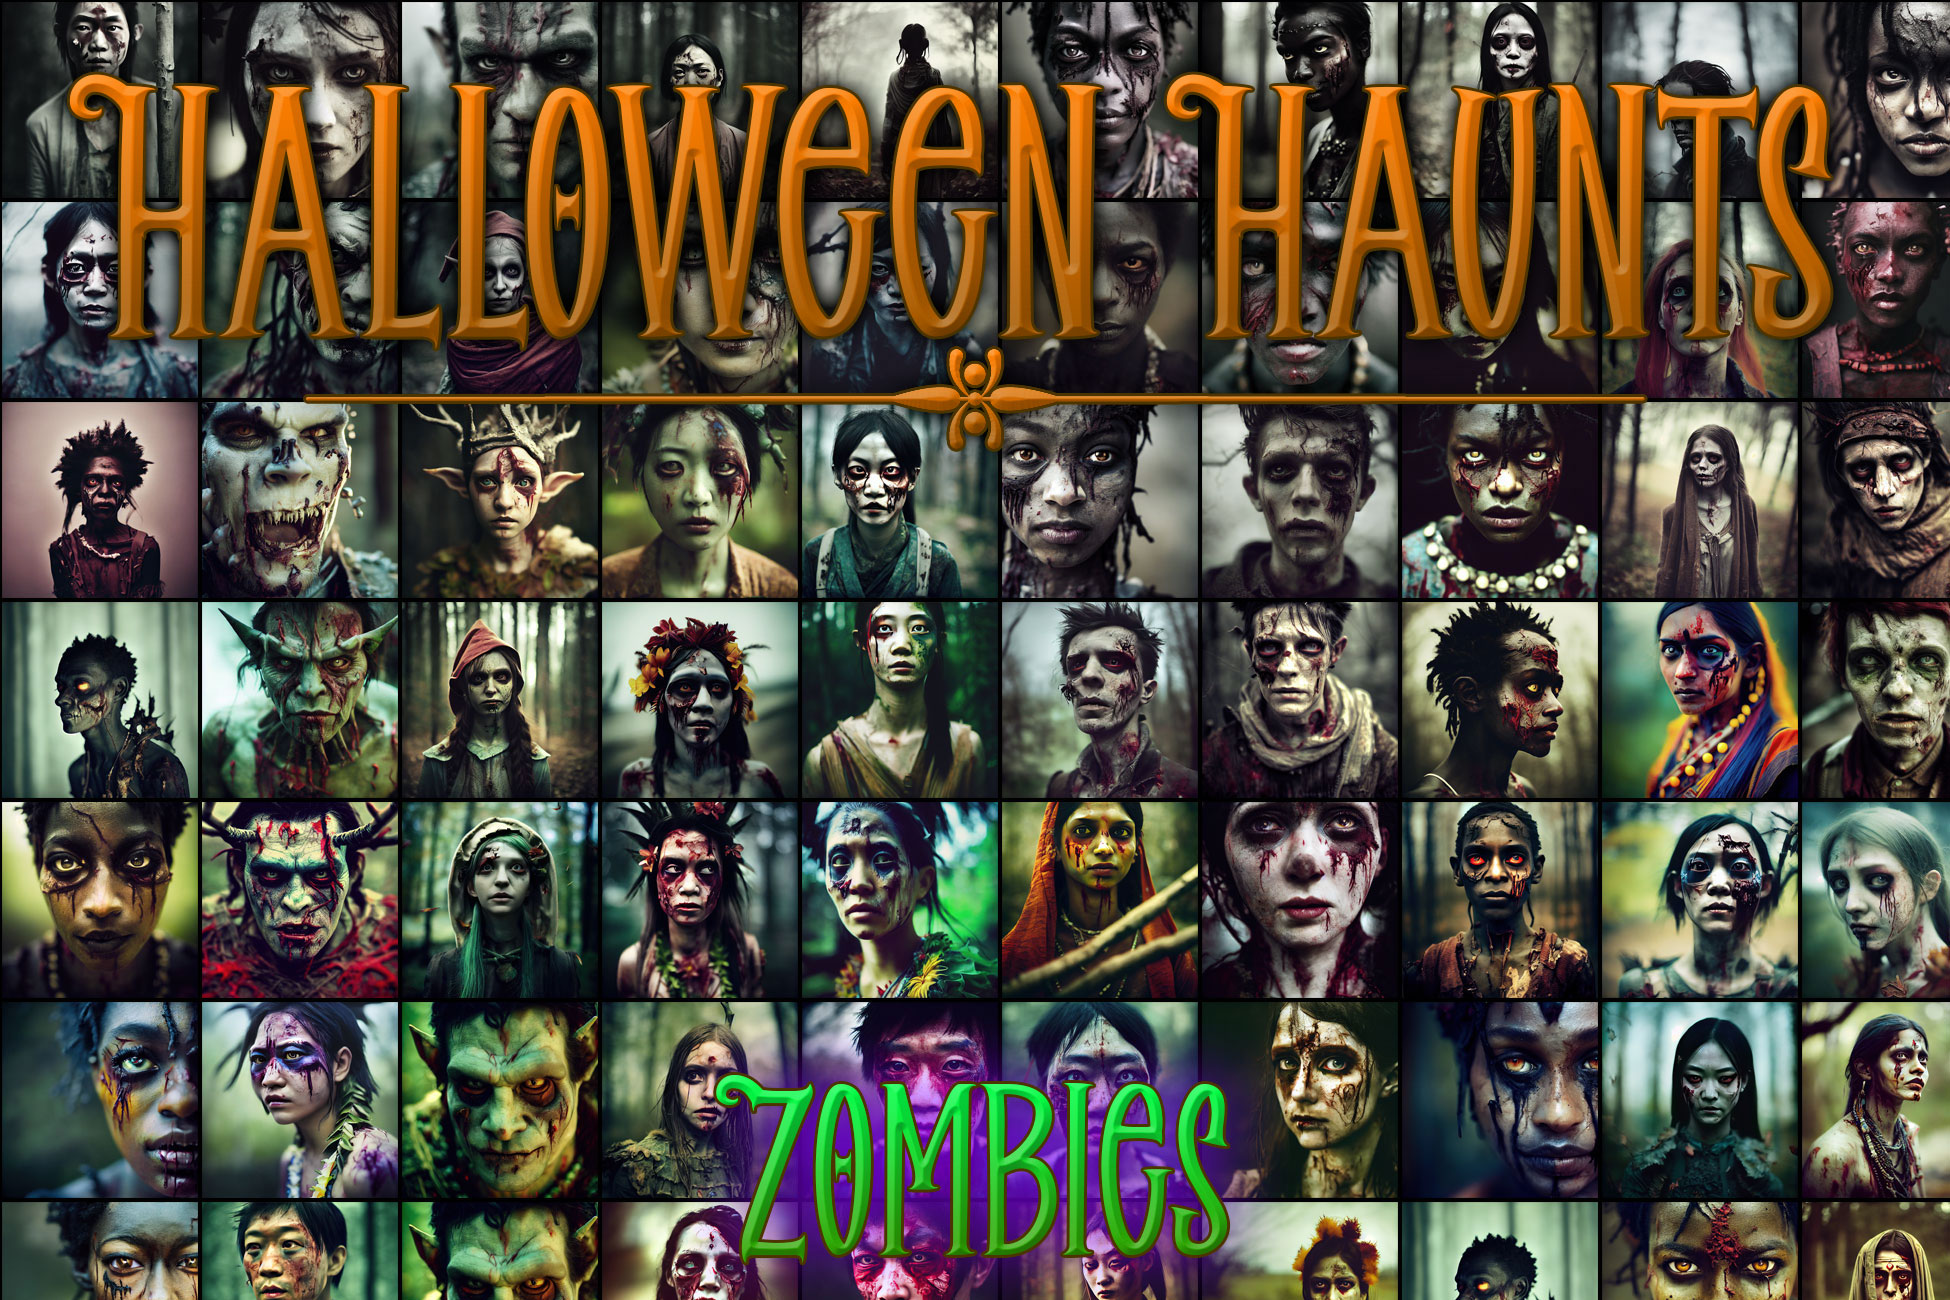 Halloween Haunts - Zombies Icon Pack for RPG / Fantasy / Realistic Games